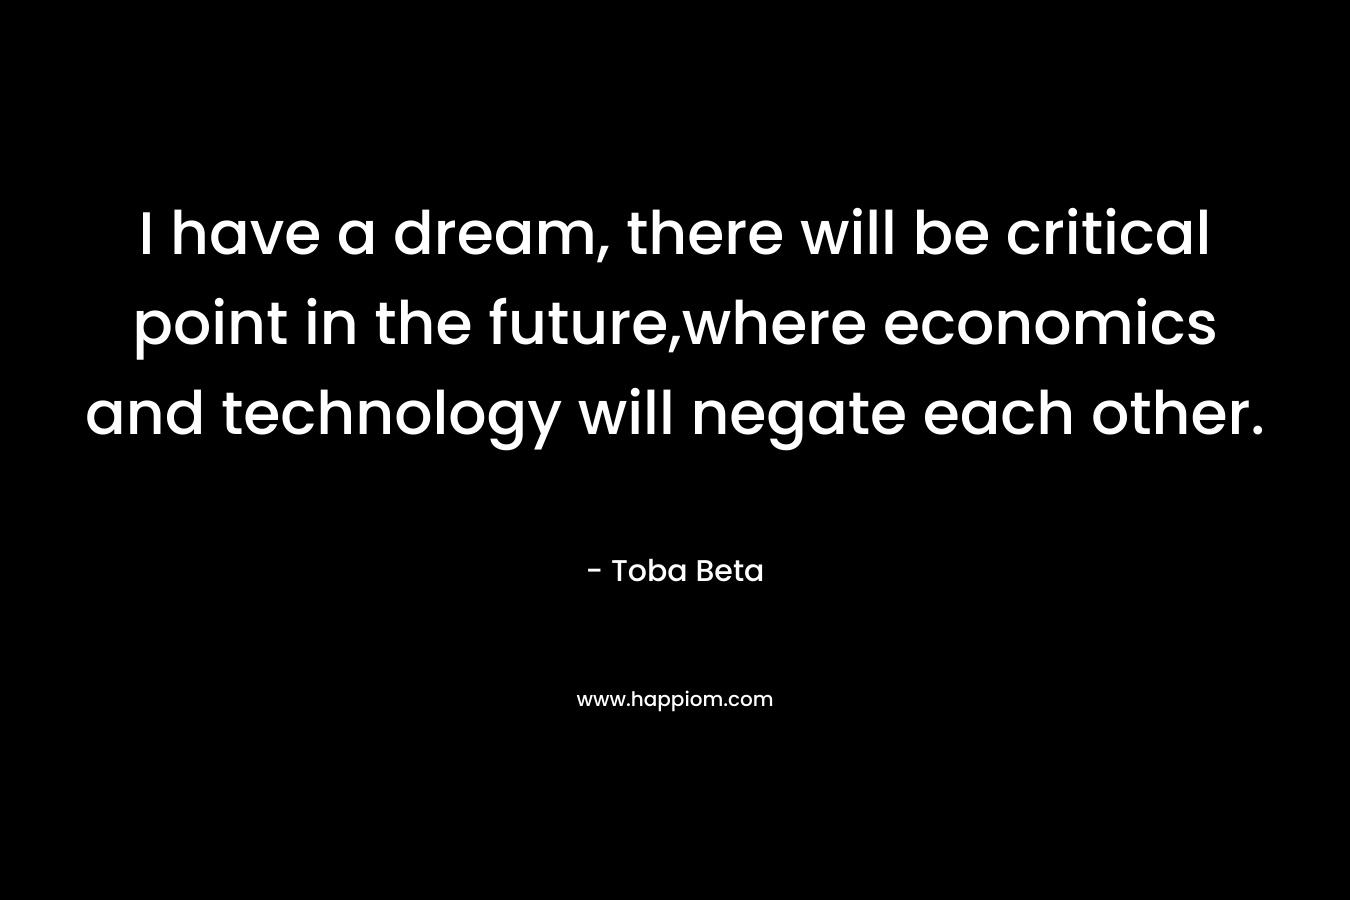 I have a dream, there will be critical point in the future,where economics and technology will negate each other.